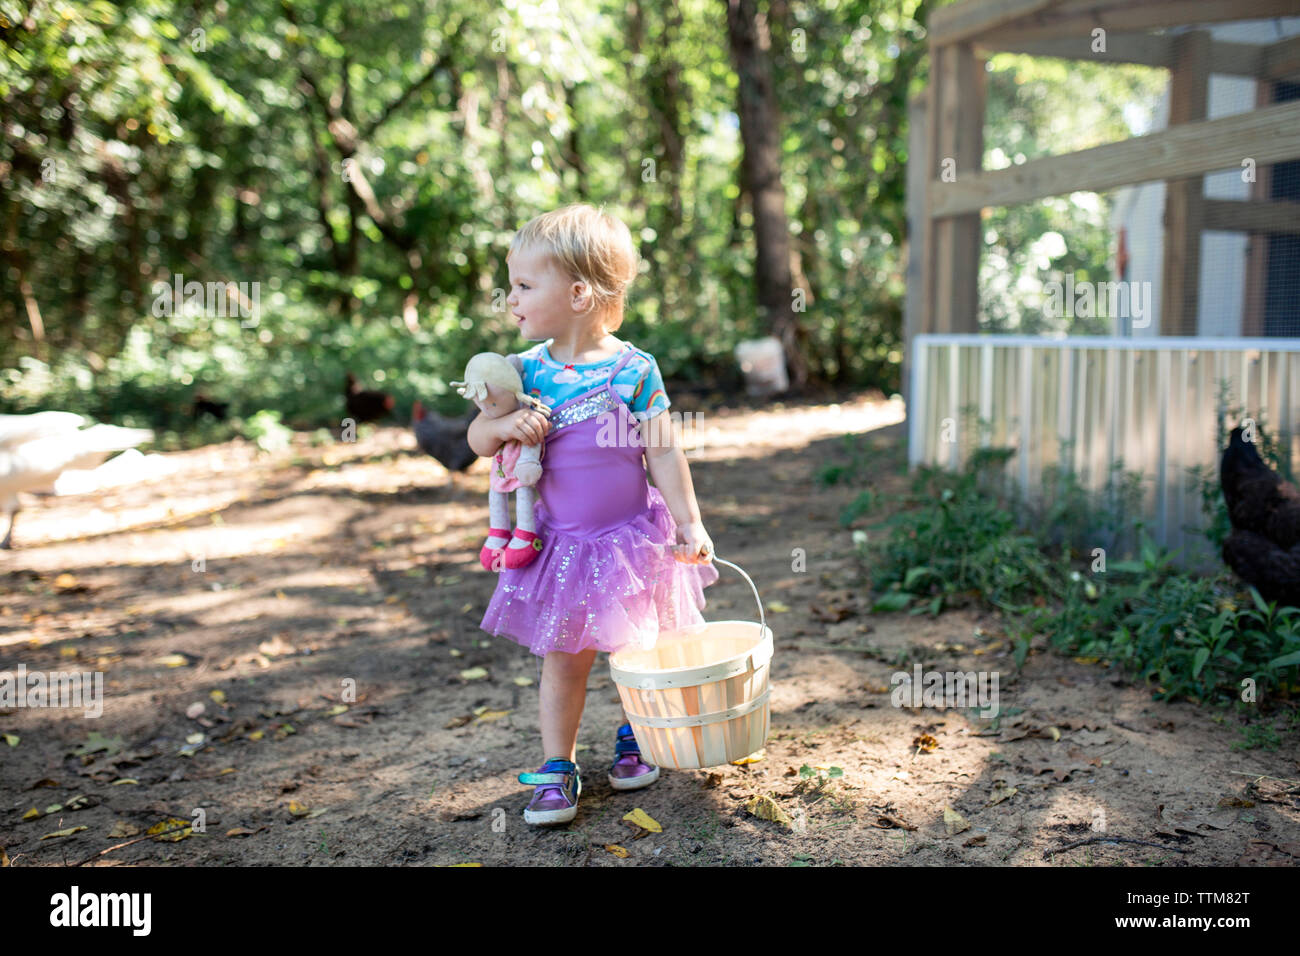 Toddler girl looking away carrying basket and baby doll dressed up Stock Photo